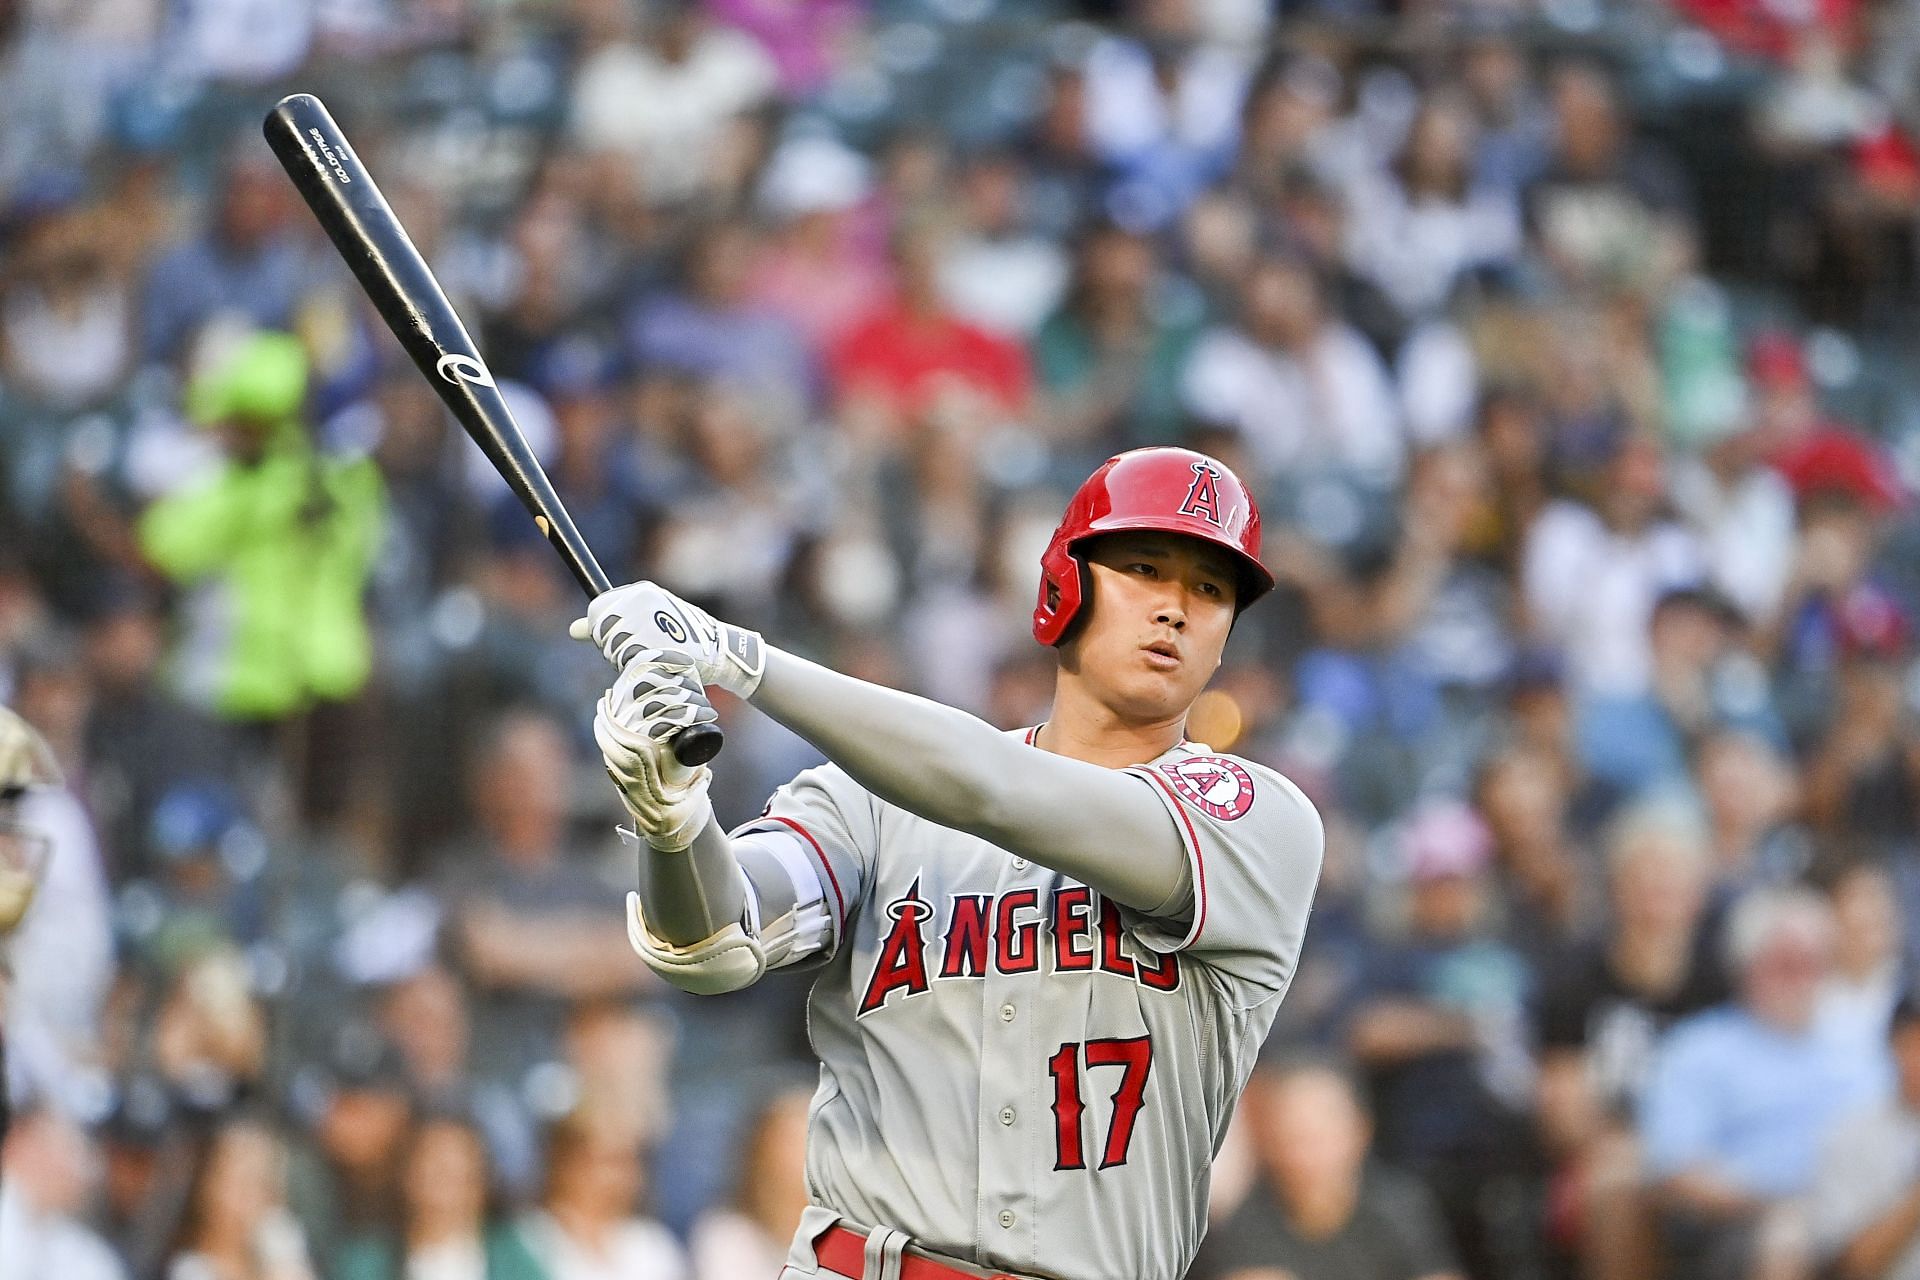 Shohei Ohtani bats during the first inning against the Seattle Mariners at T-Mobile Park.